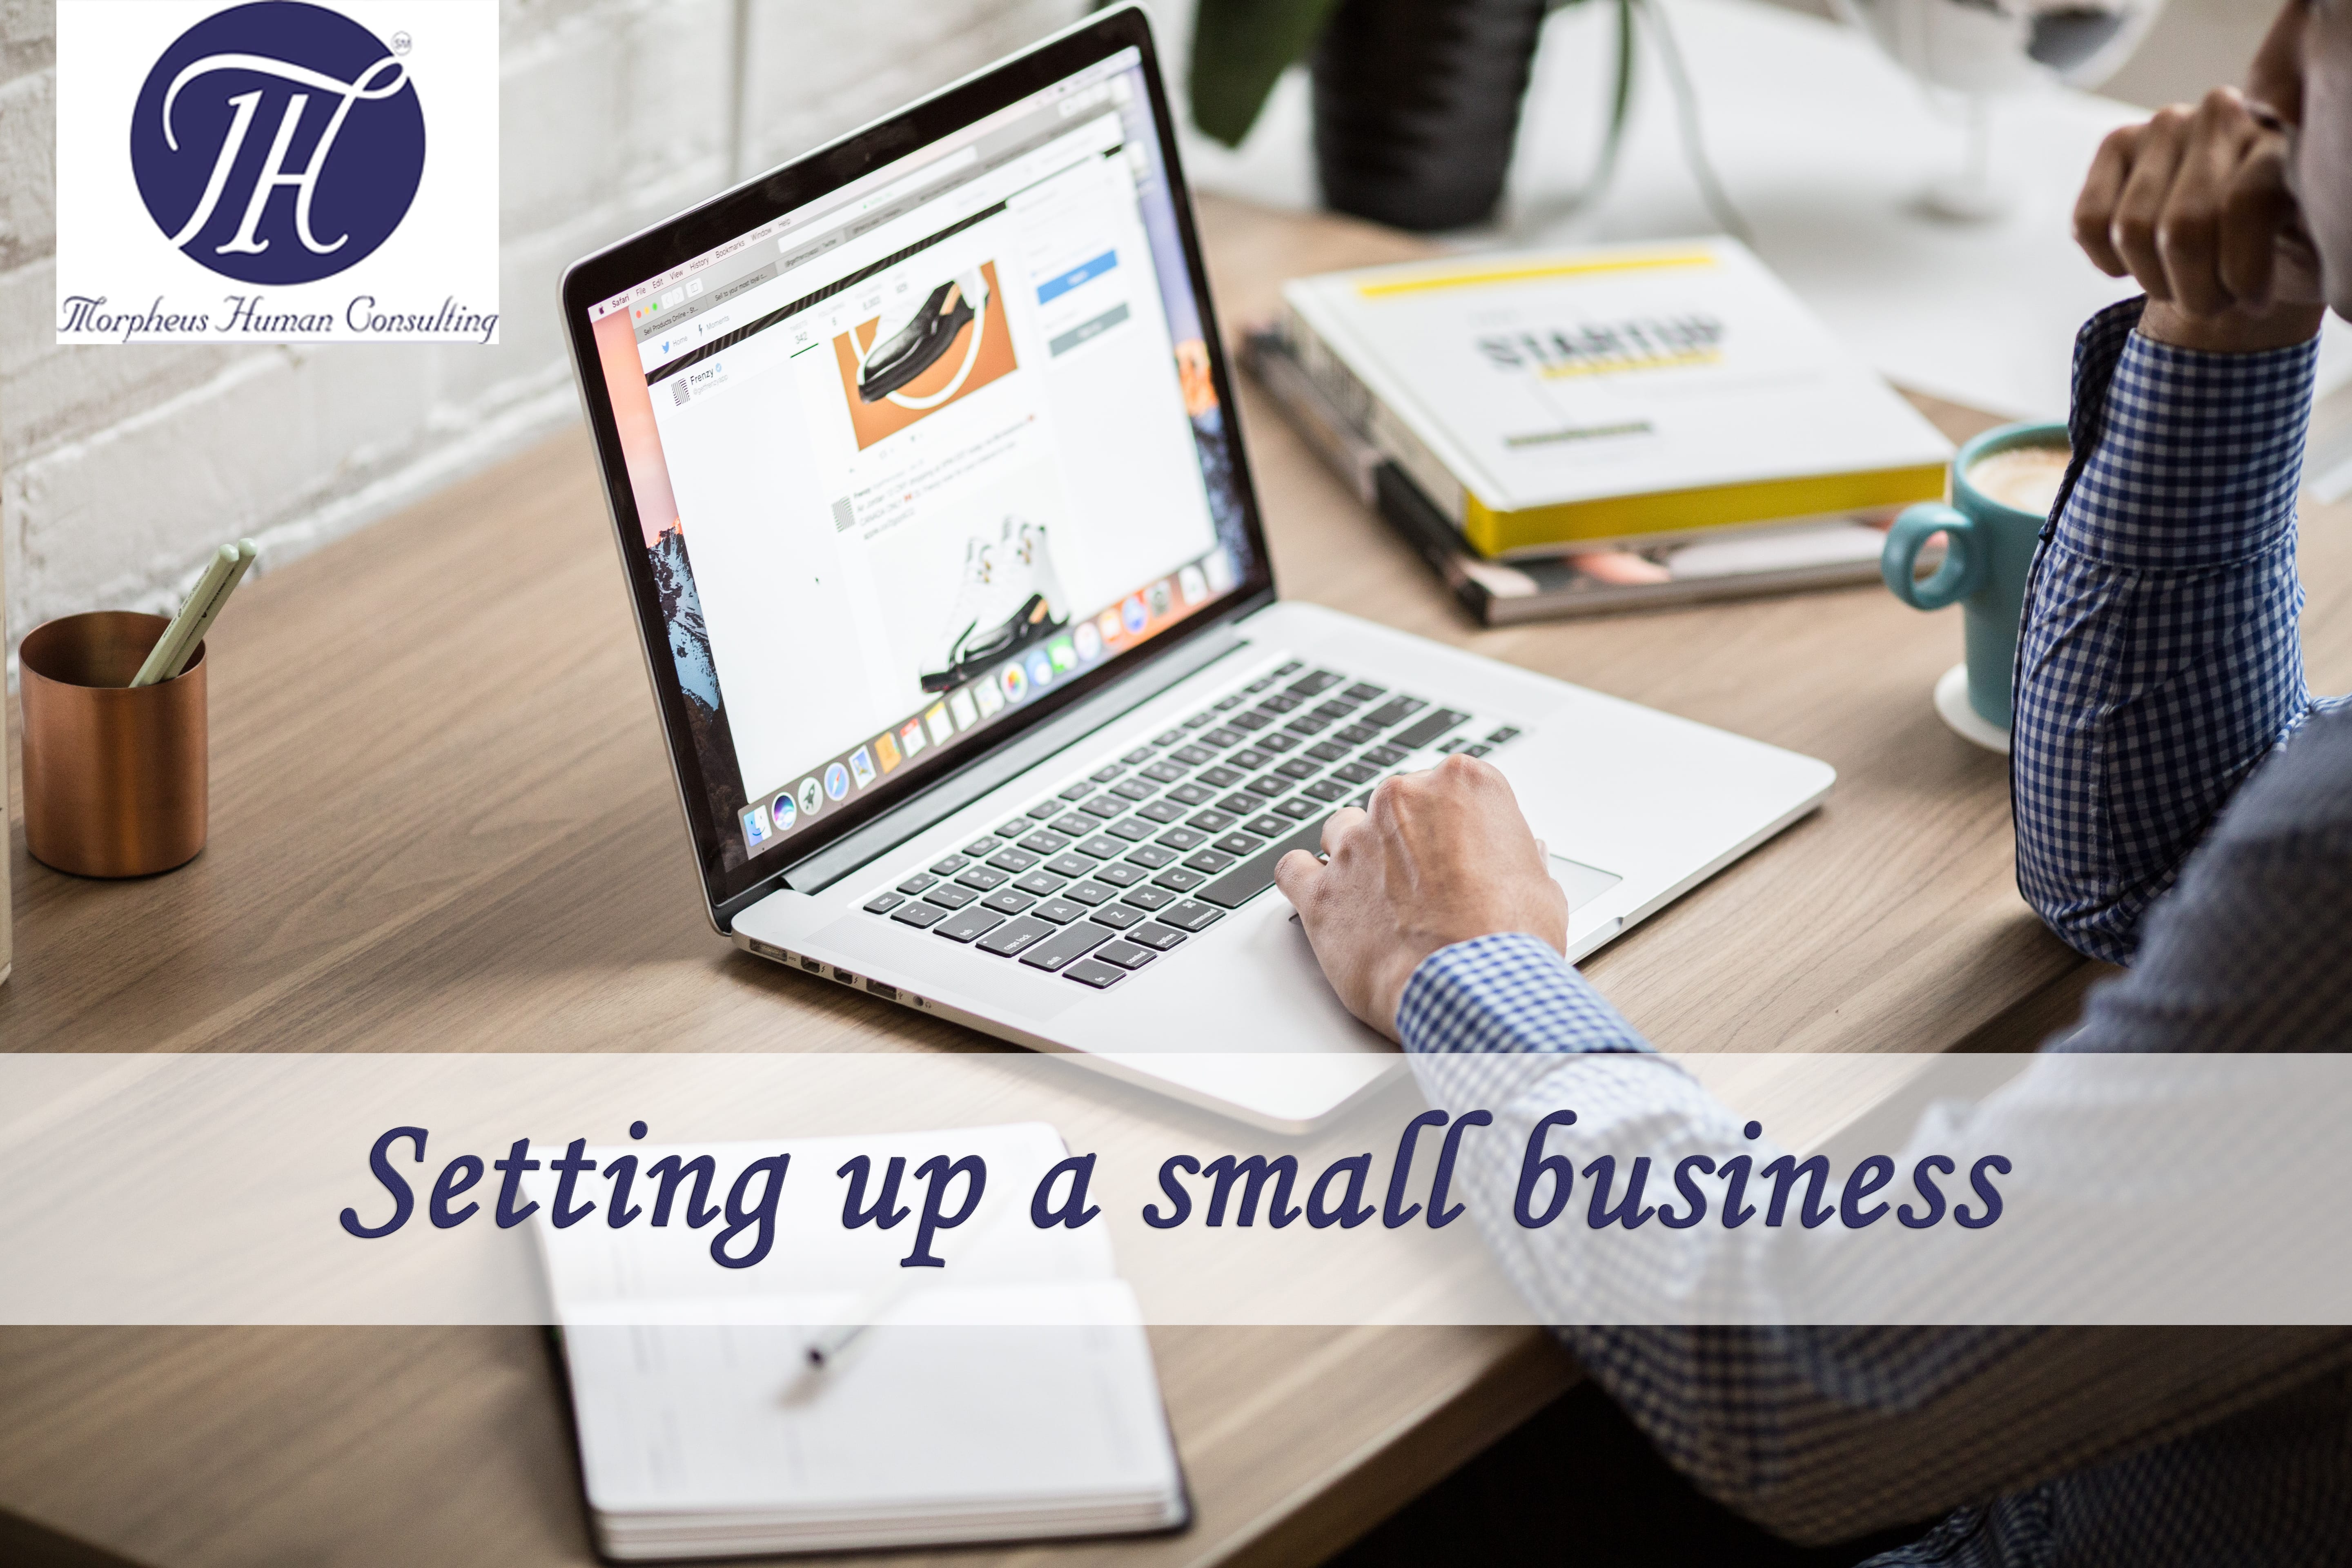 Setup a small business just in few steps